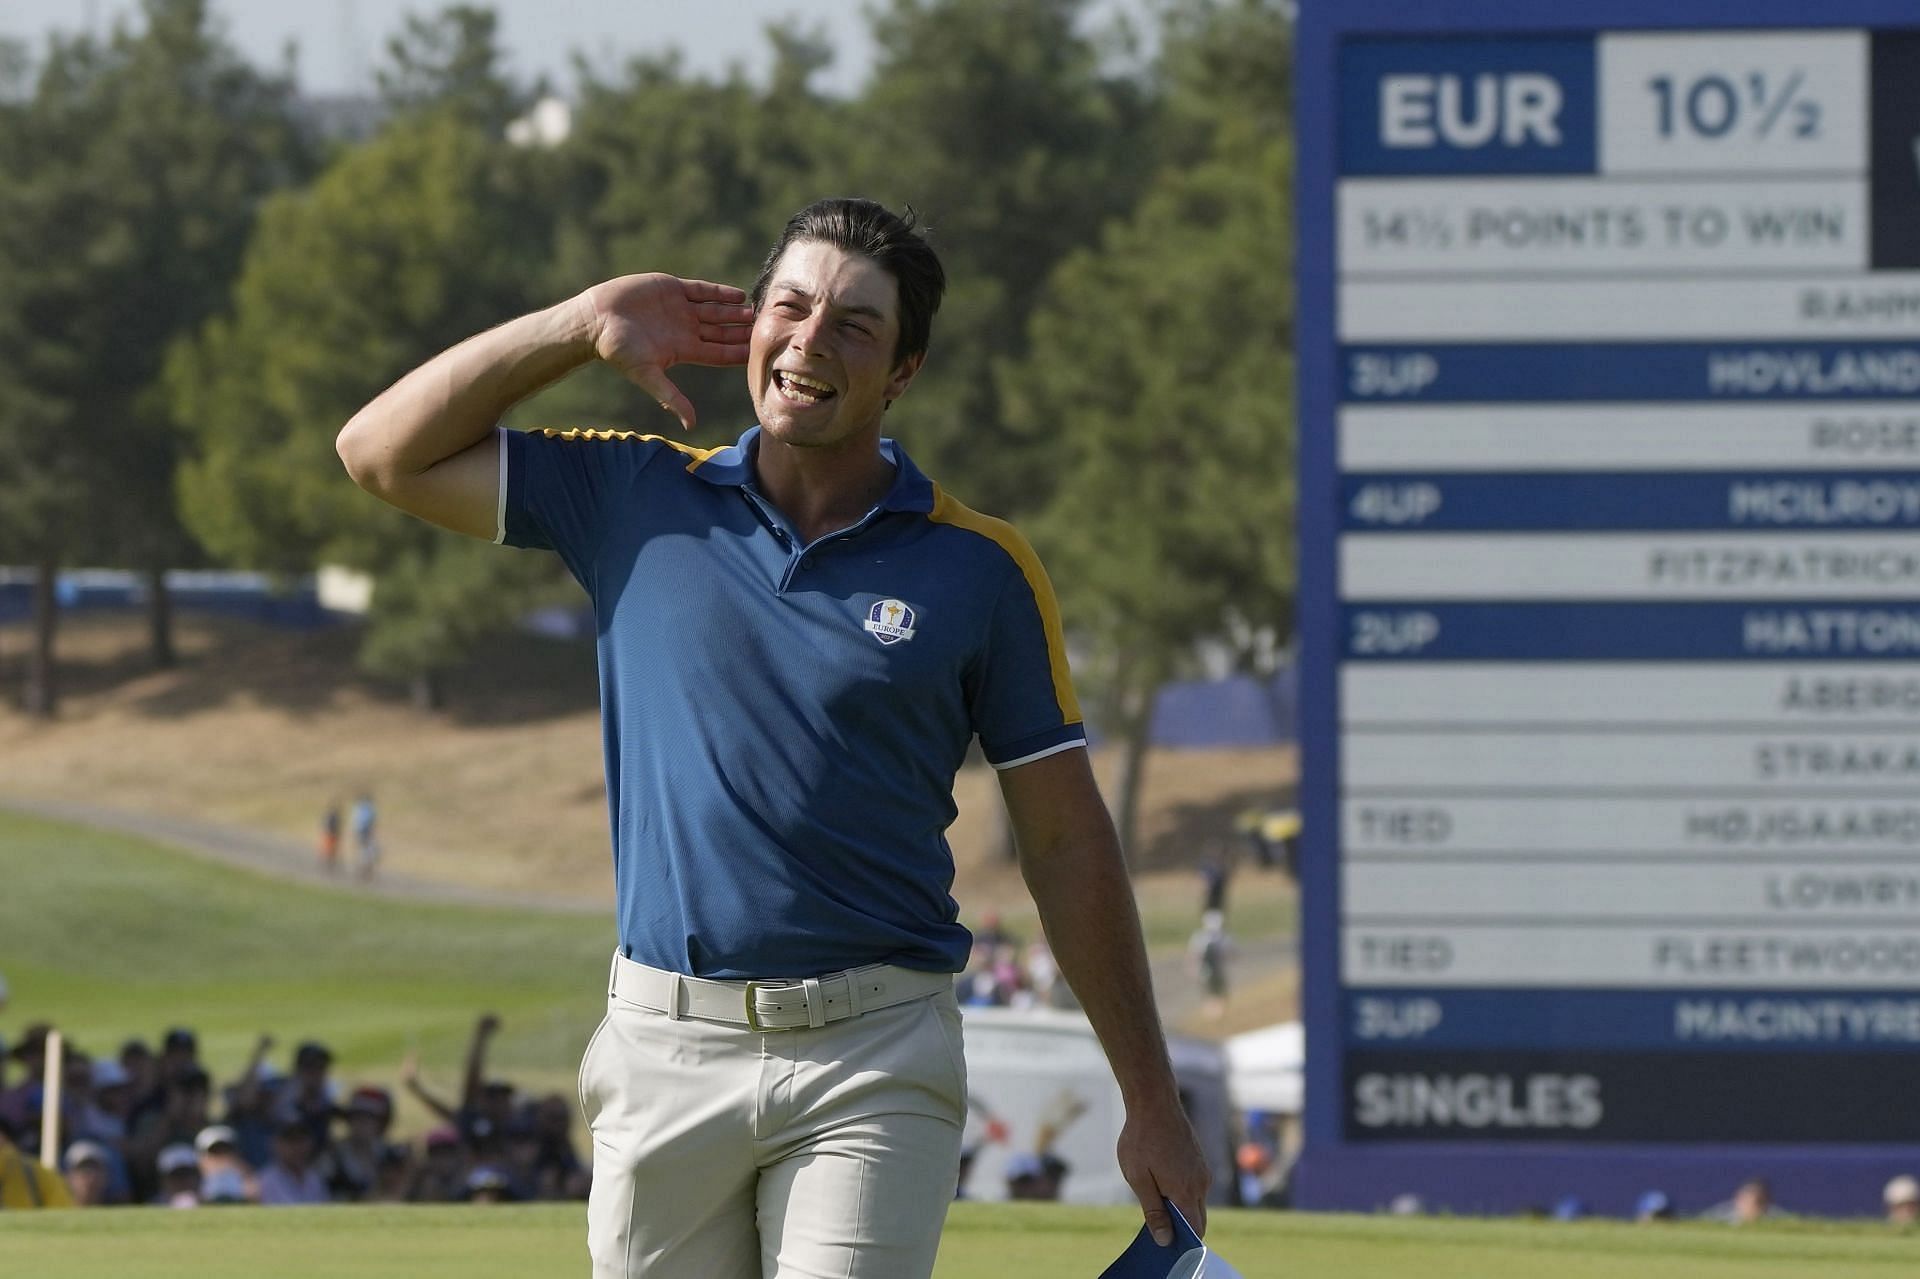 Viktor Hovland was last seen at the 2023 Ryder Cup